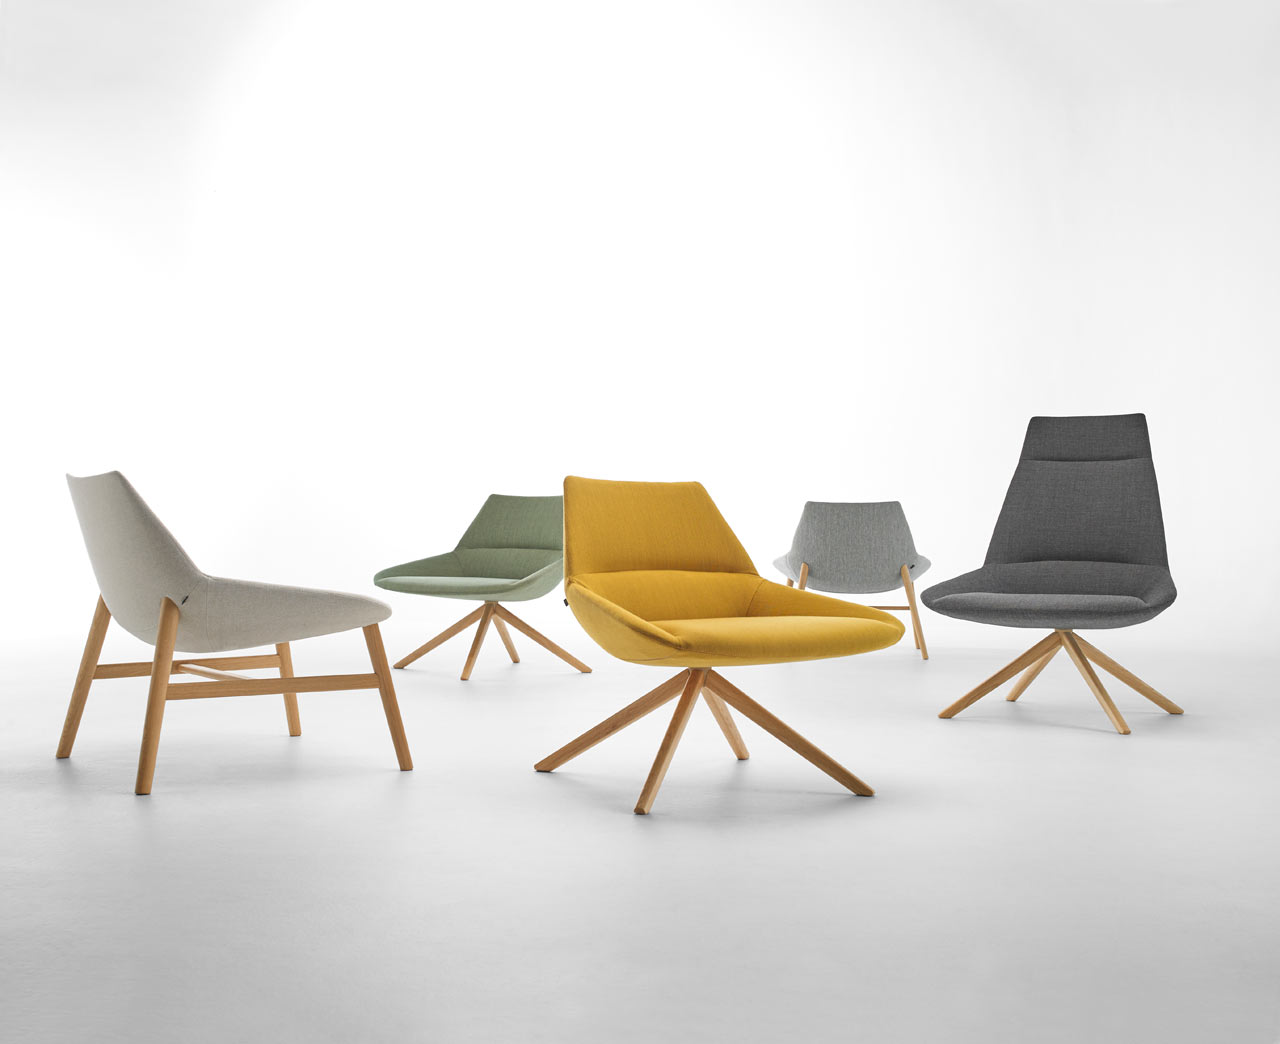 DUNAS XL WOOD by Christophe Pillet for INCLASS